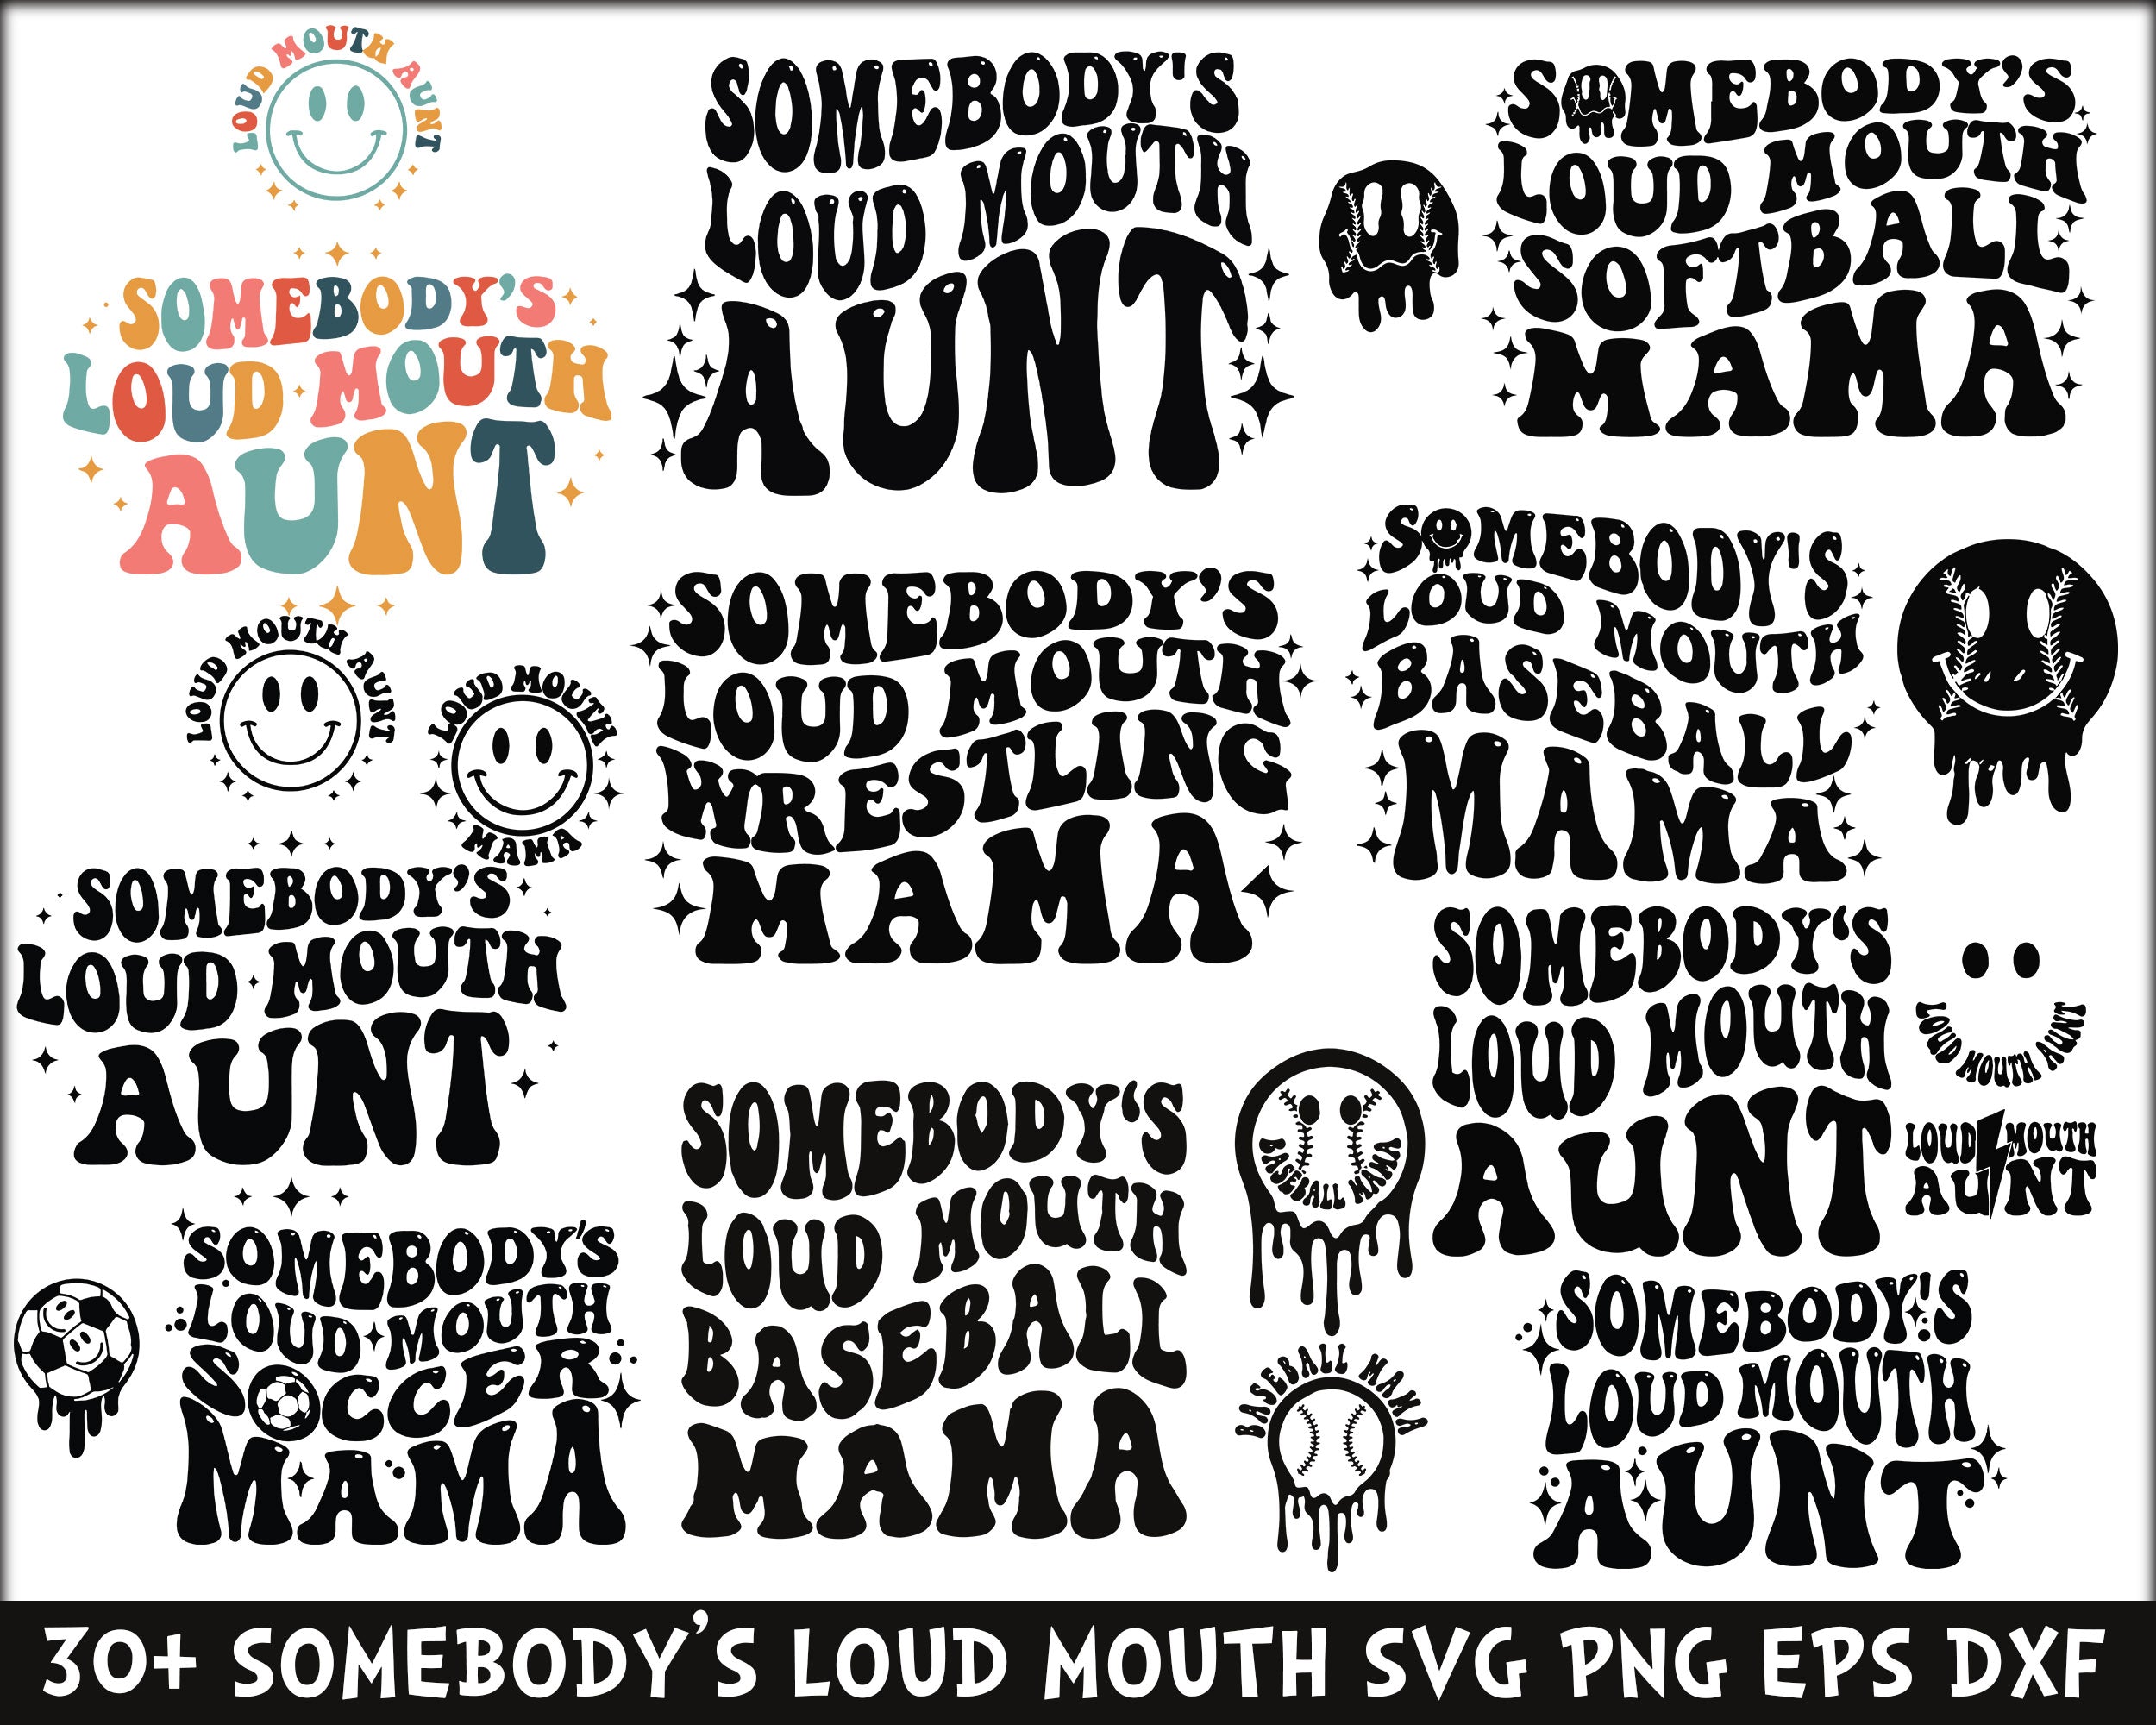 Somebody's Loud Mouth Aunt Svg, Somebody's Loud MOUTH Aunt Png, Clipart svg png eps dxf, Digital Download